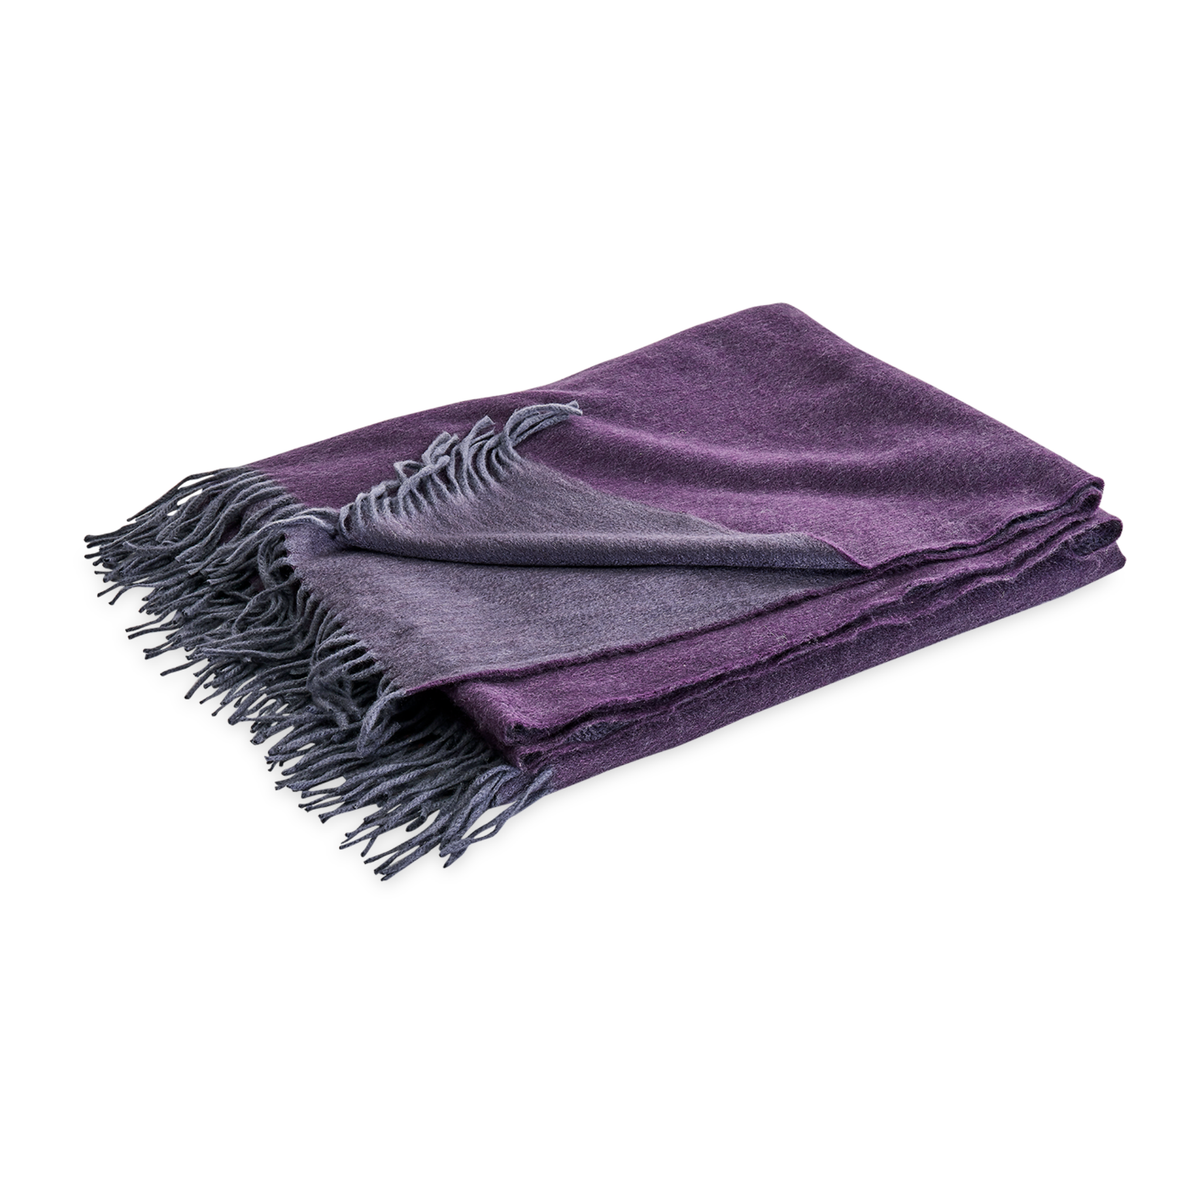 Folded Matouk Paley Throws in Night and Mulberry Color